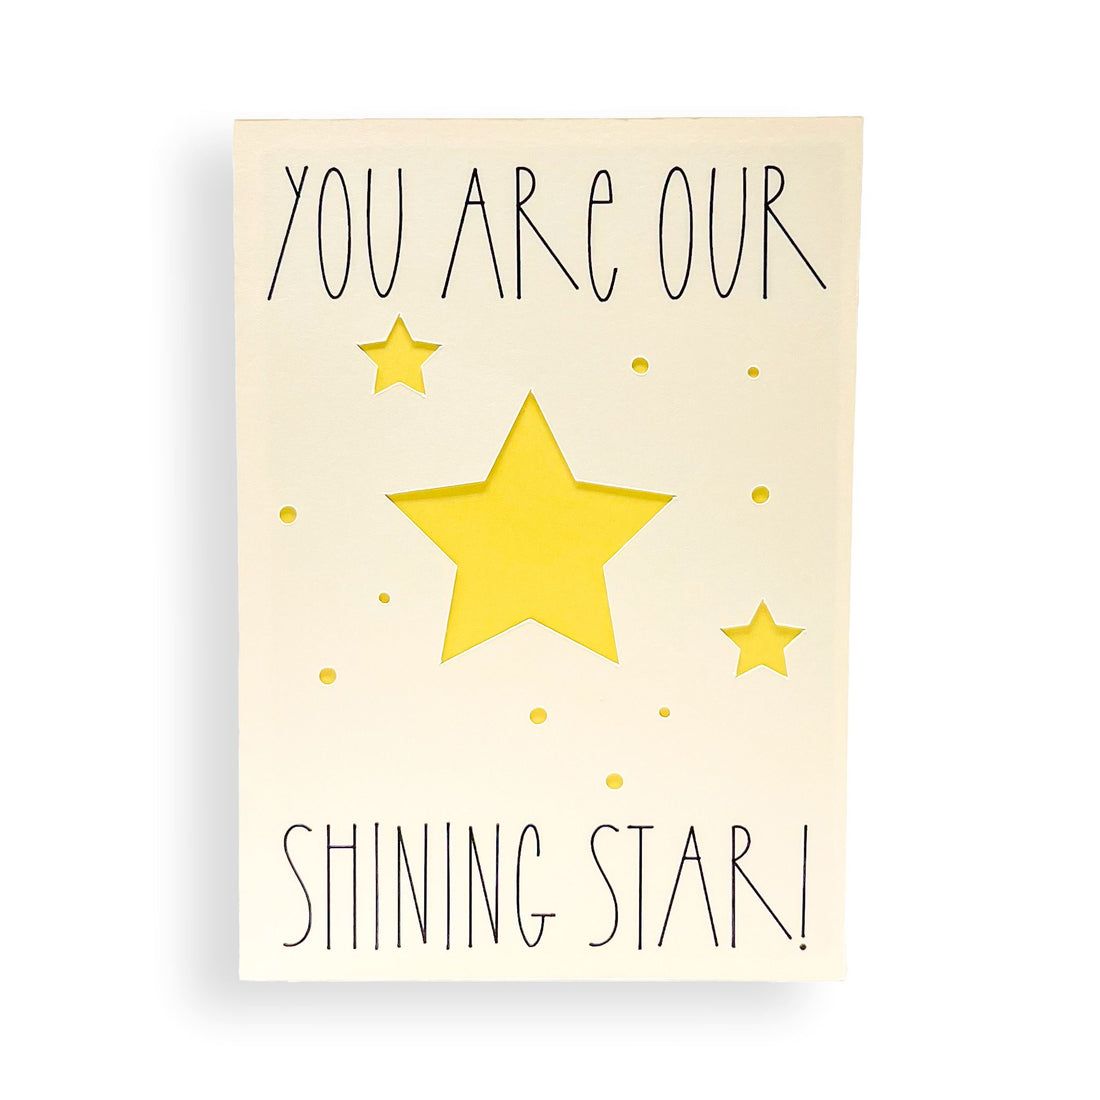 You Are A Shining Star Greeting Card House of Intuition Inc 